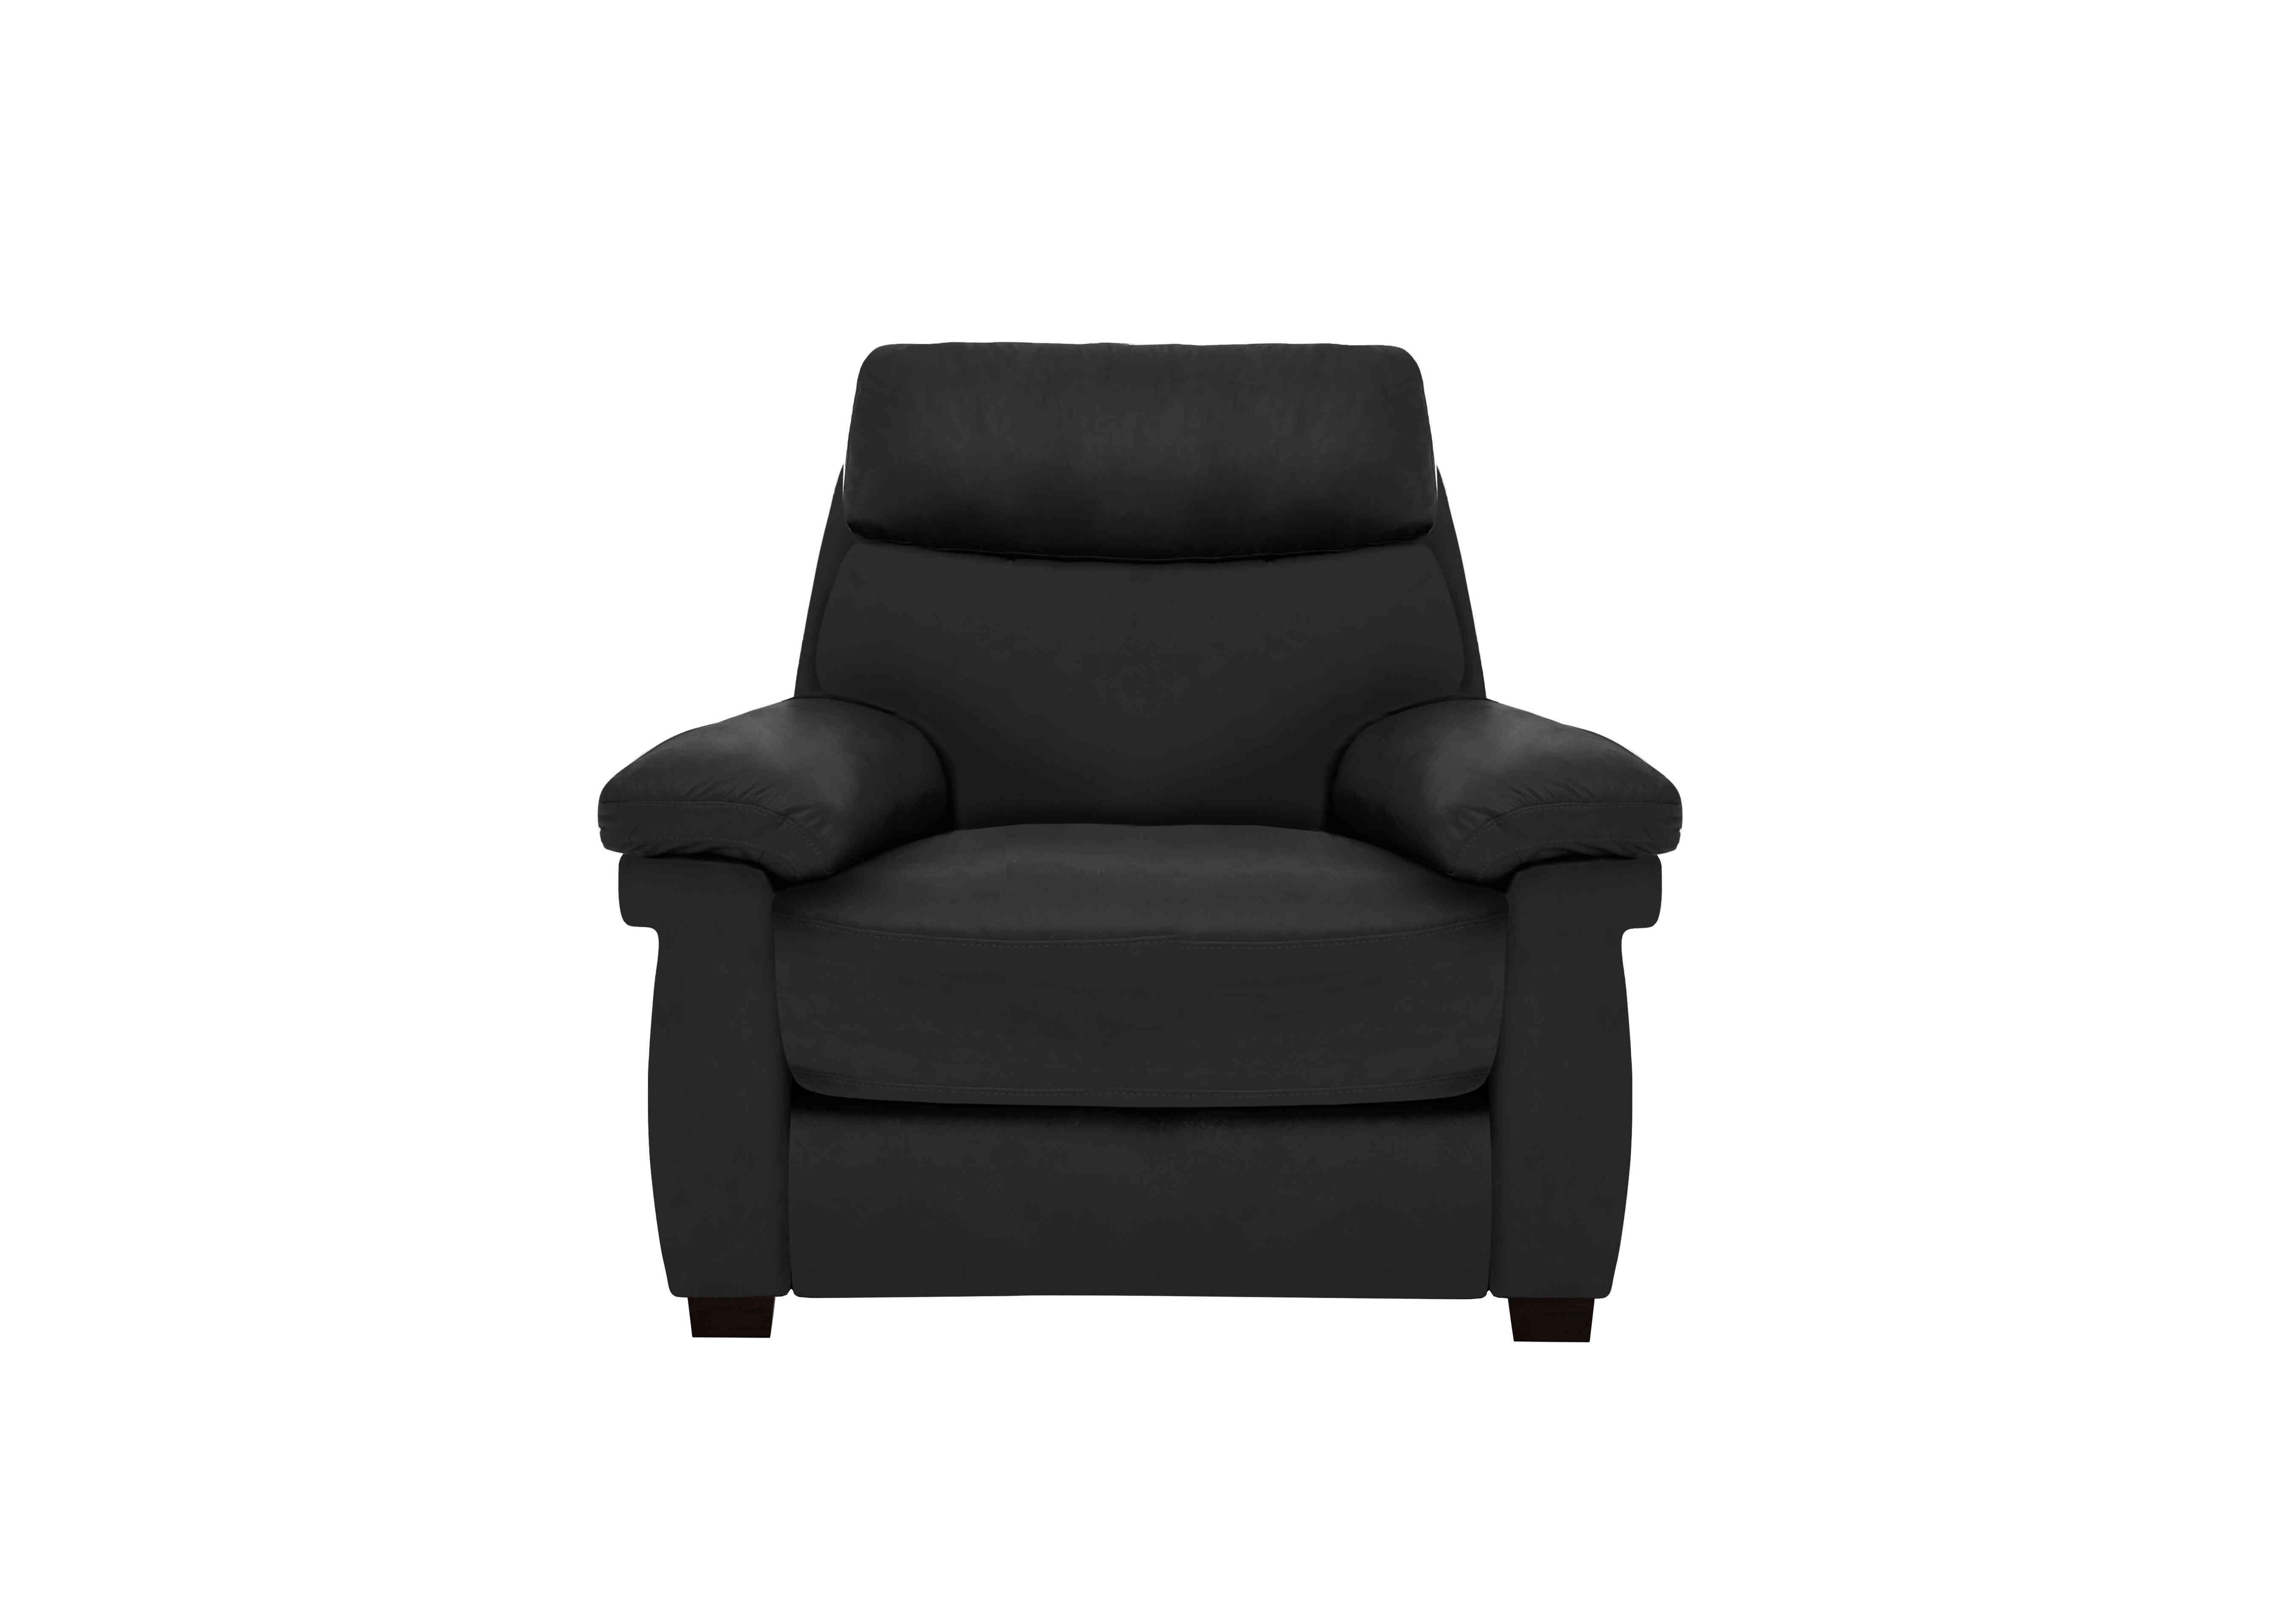 Serene Leather Chair in Bx-023c Black on Furniture Village